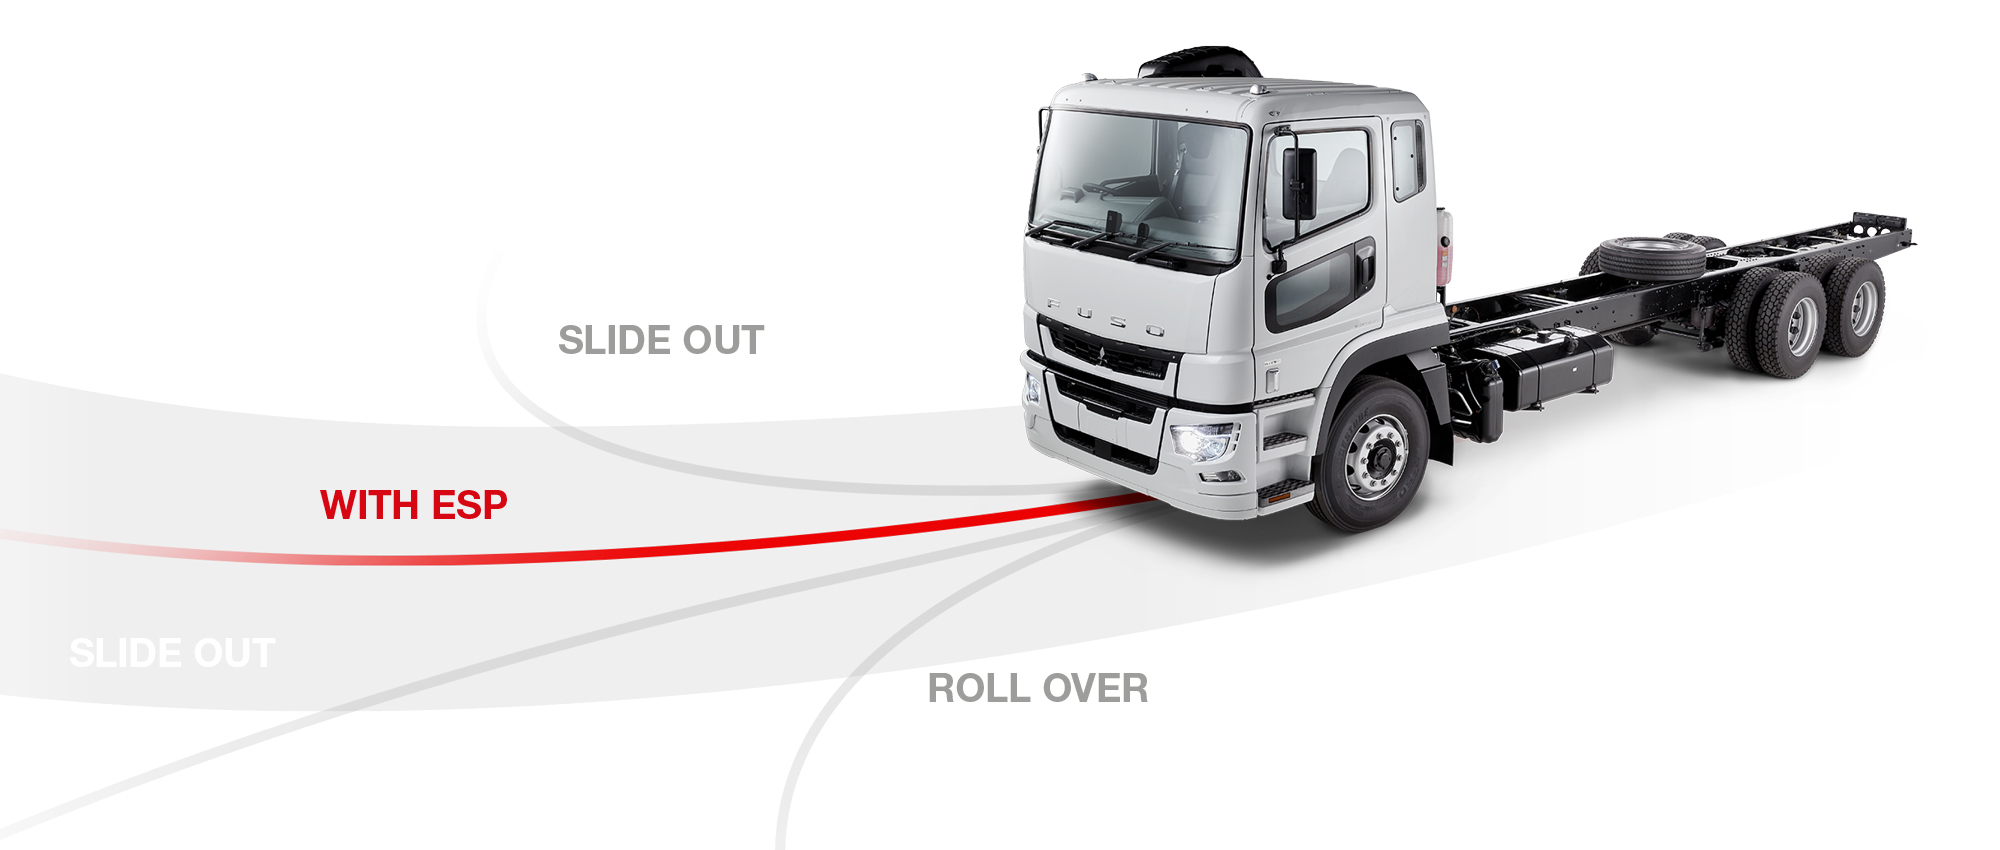 Electronic Stability Control can help prevent rolls or slips in Daimler vehicles 